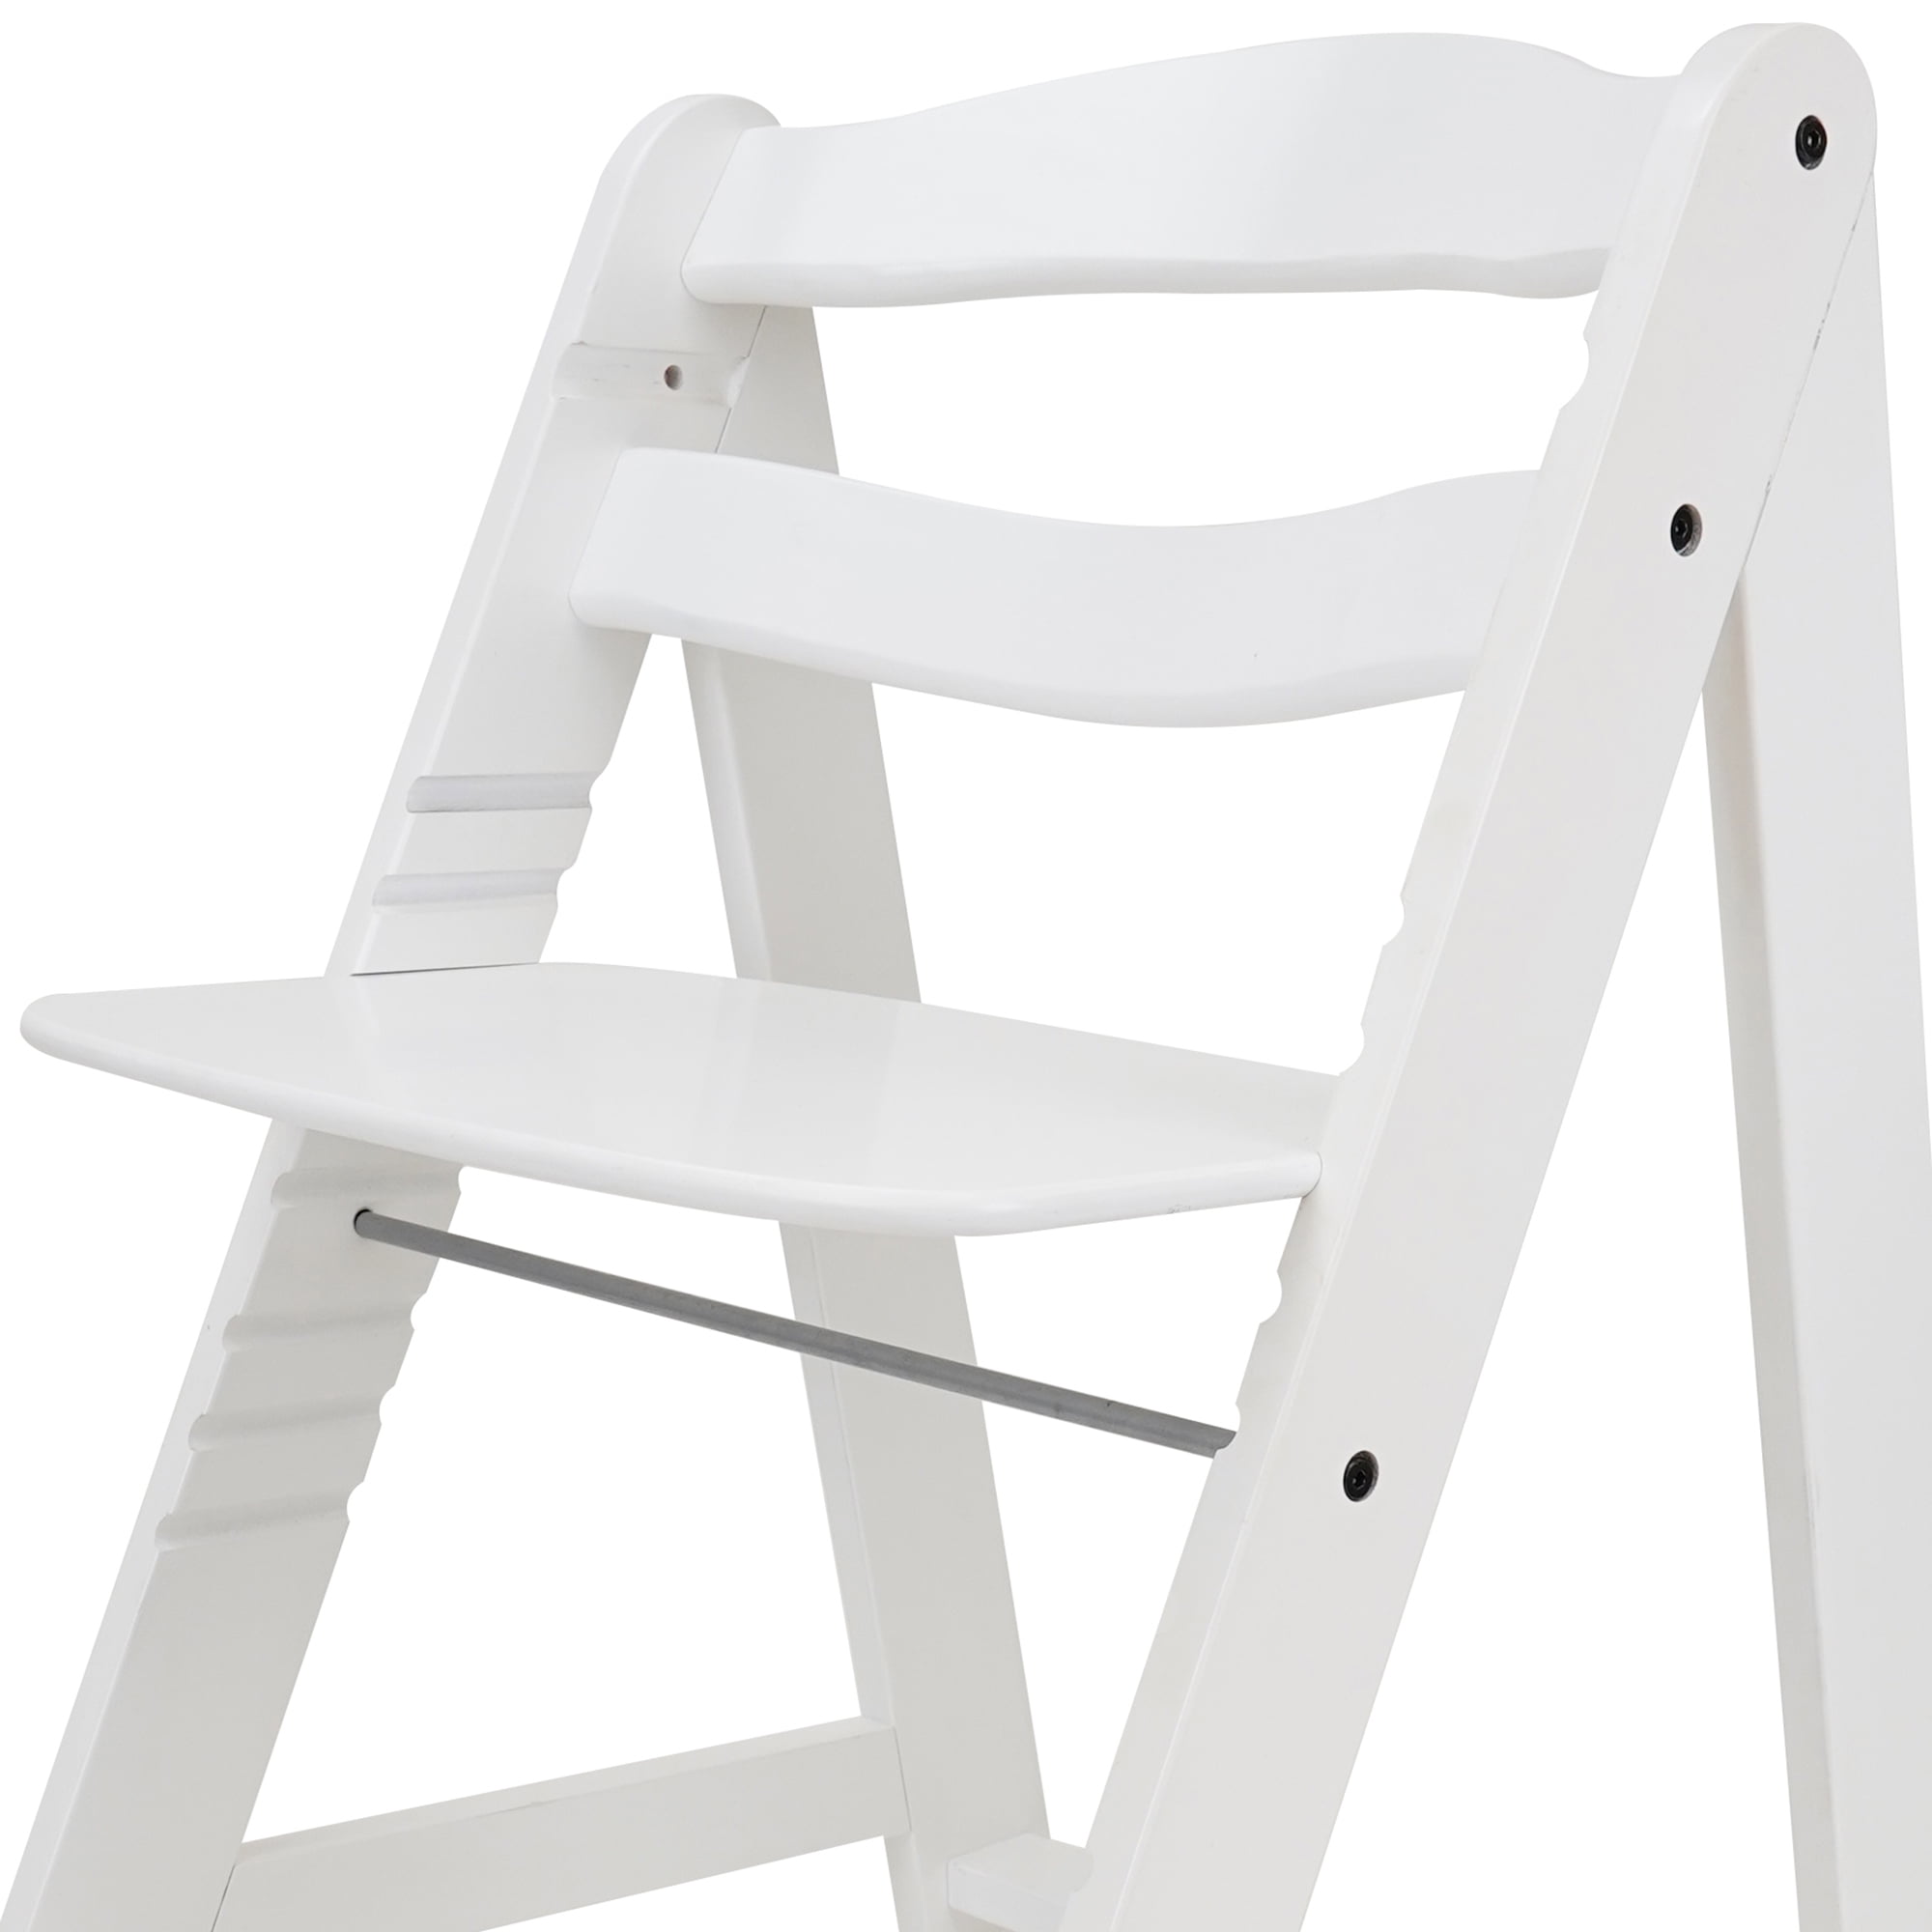 509 Sky Wooden Chair: White - Made Of Hard German Beechwood, Kids  Furniture, Adjustable Seat & Footrest, Ages 3+, Up to 218 lbs.